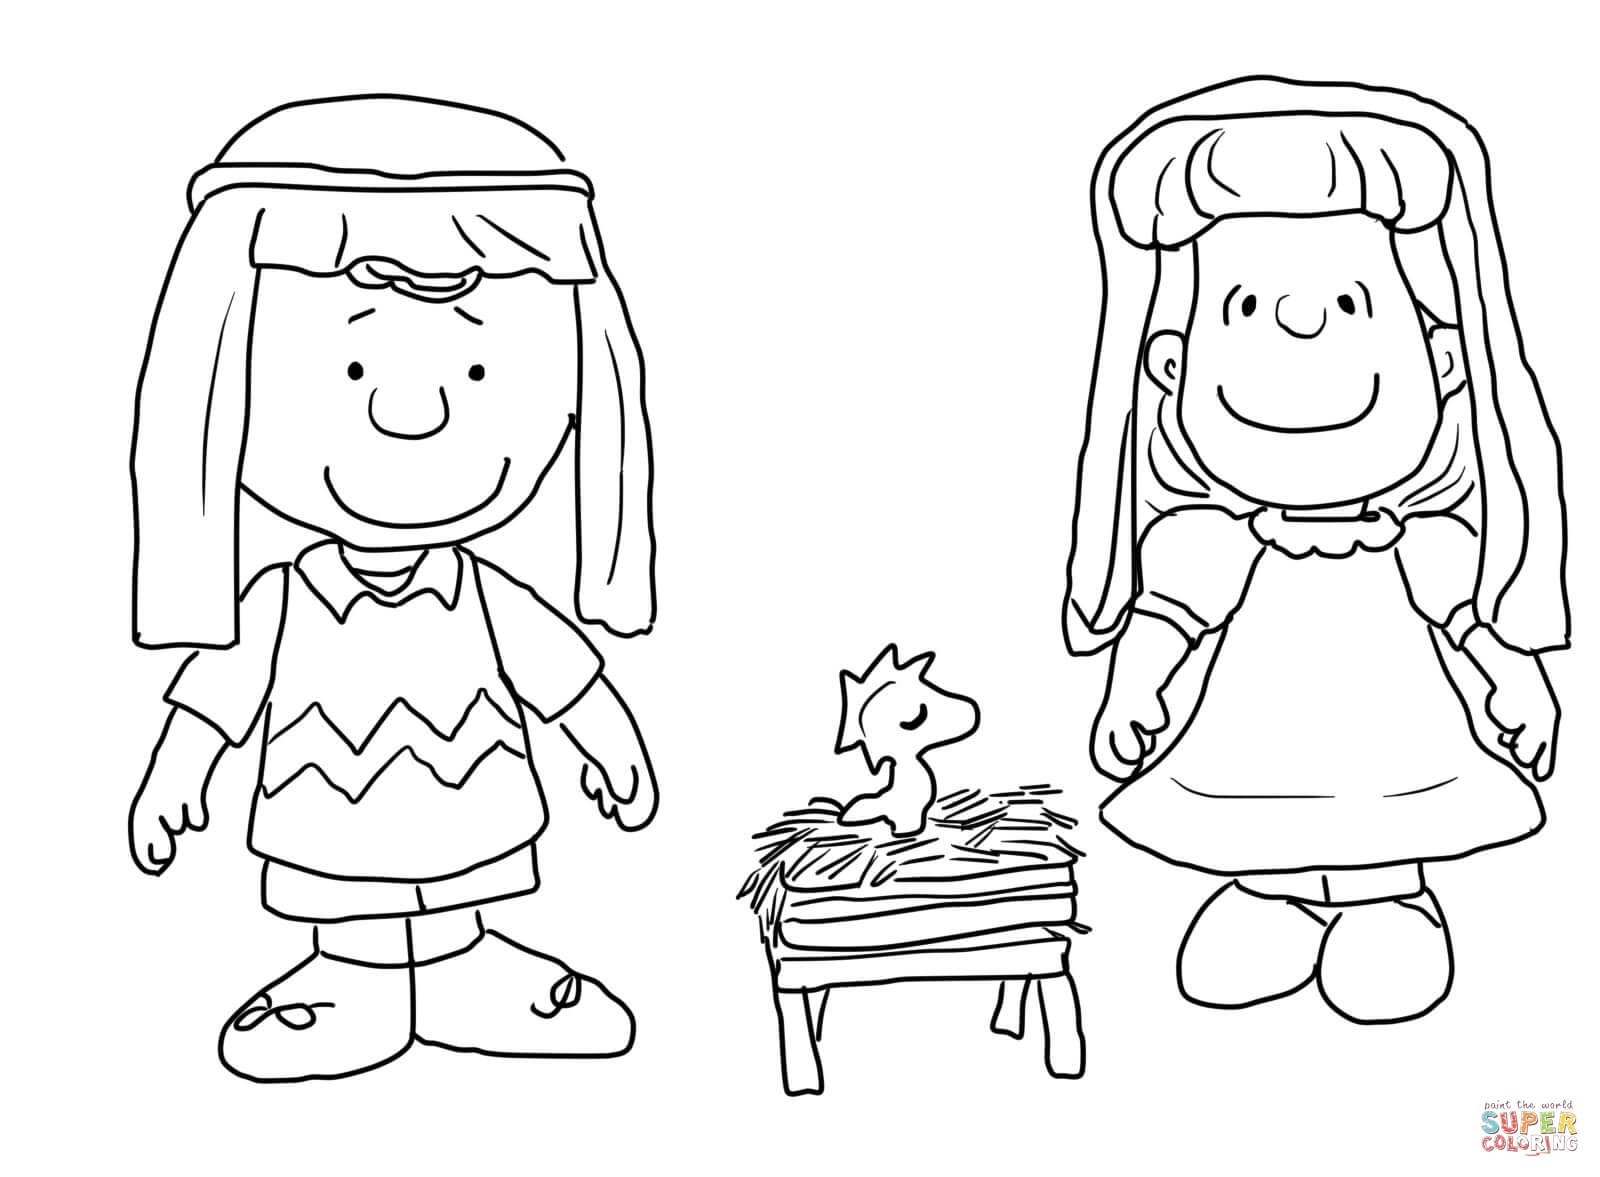 Charlie brown christmas nativity coloring page free printable coloring pages